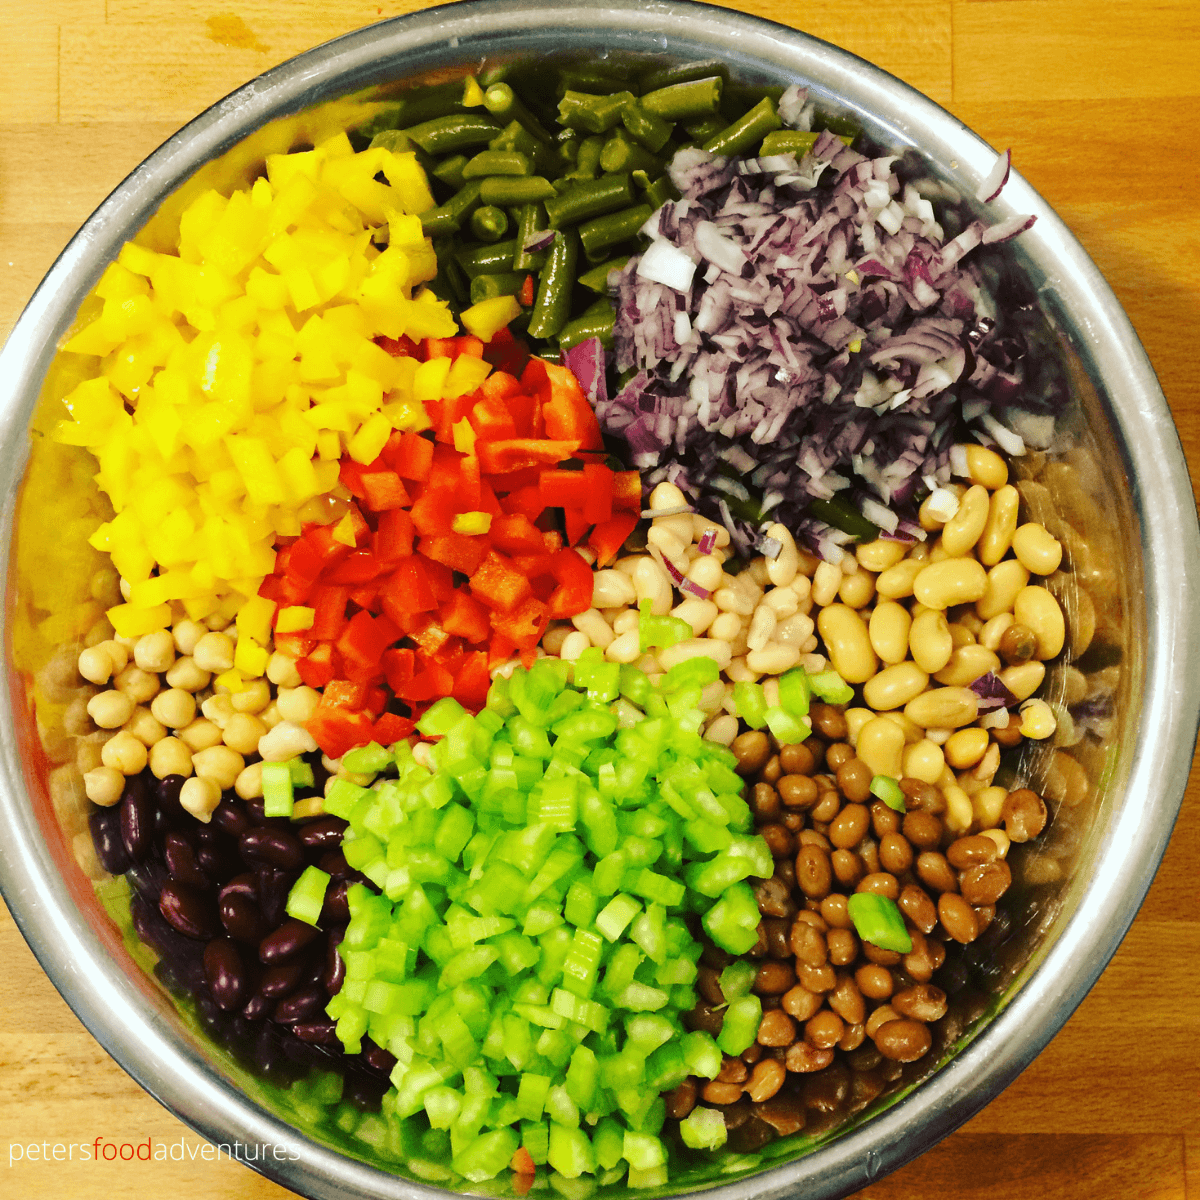 making 7 bean salad with canned bean, celery, red peppers in a large bowl